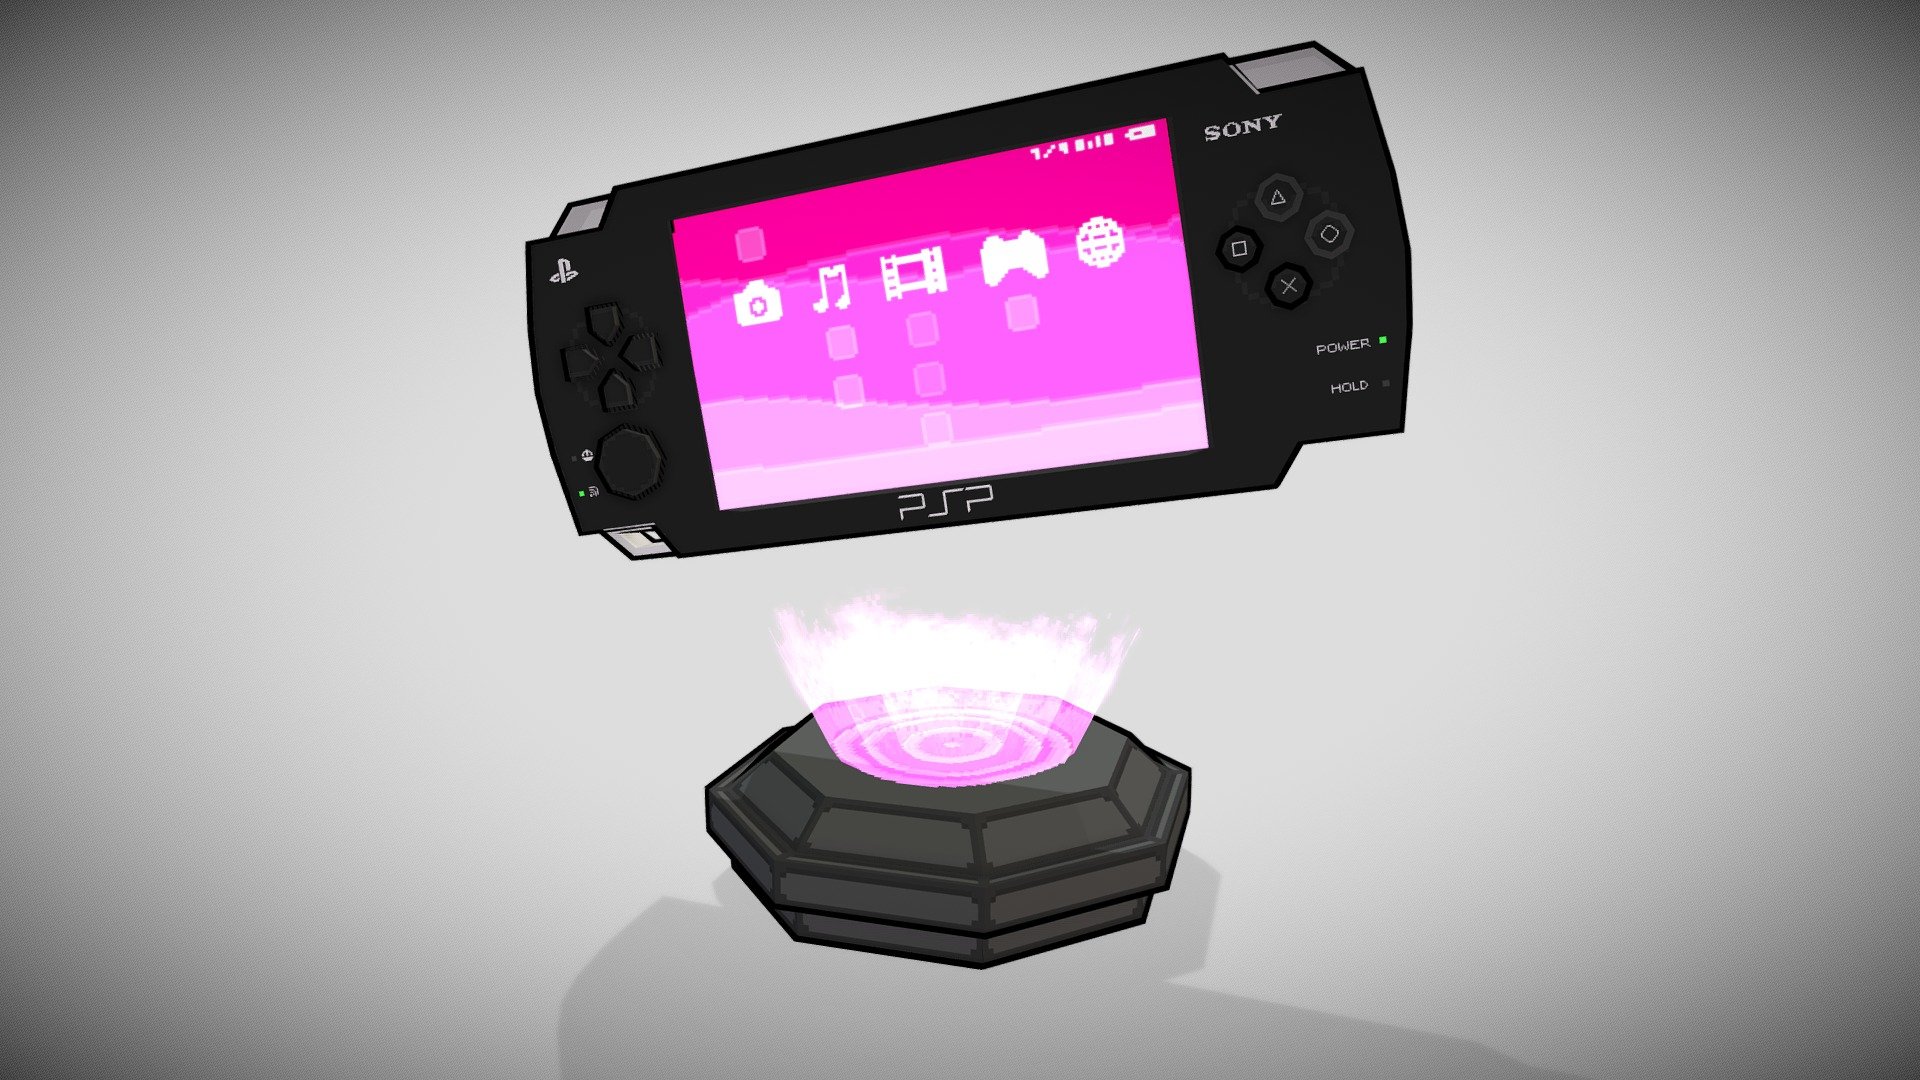 PSP low poly with pixel perfect textures (256 x 256px).

Model number 3 of a collection of 10 low poly models of video game consoles.




3D model: Blender 3.1.2

Textures pixel art: Asesprite 1.3 &amp; Photoshop 2021

Contact: https://www.instagram.com/nagapixart/ - PSP (PlayStation Portable) - 3D model by IamNaga 3d model